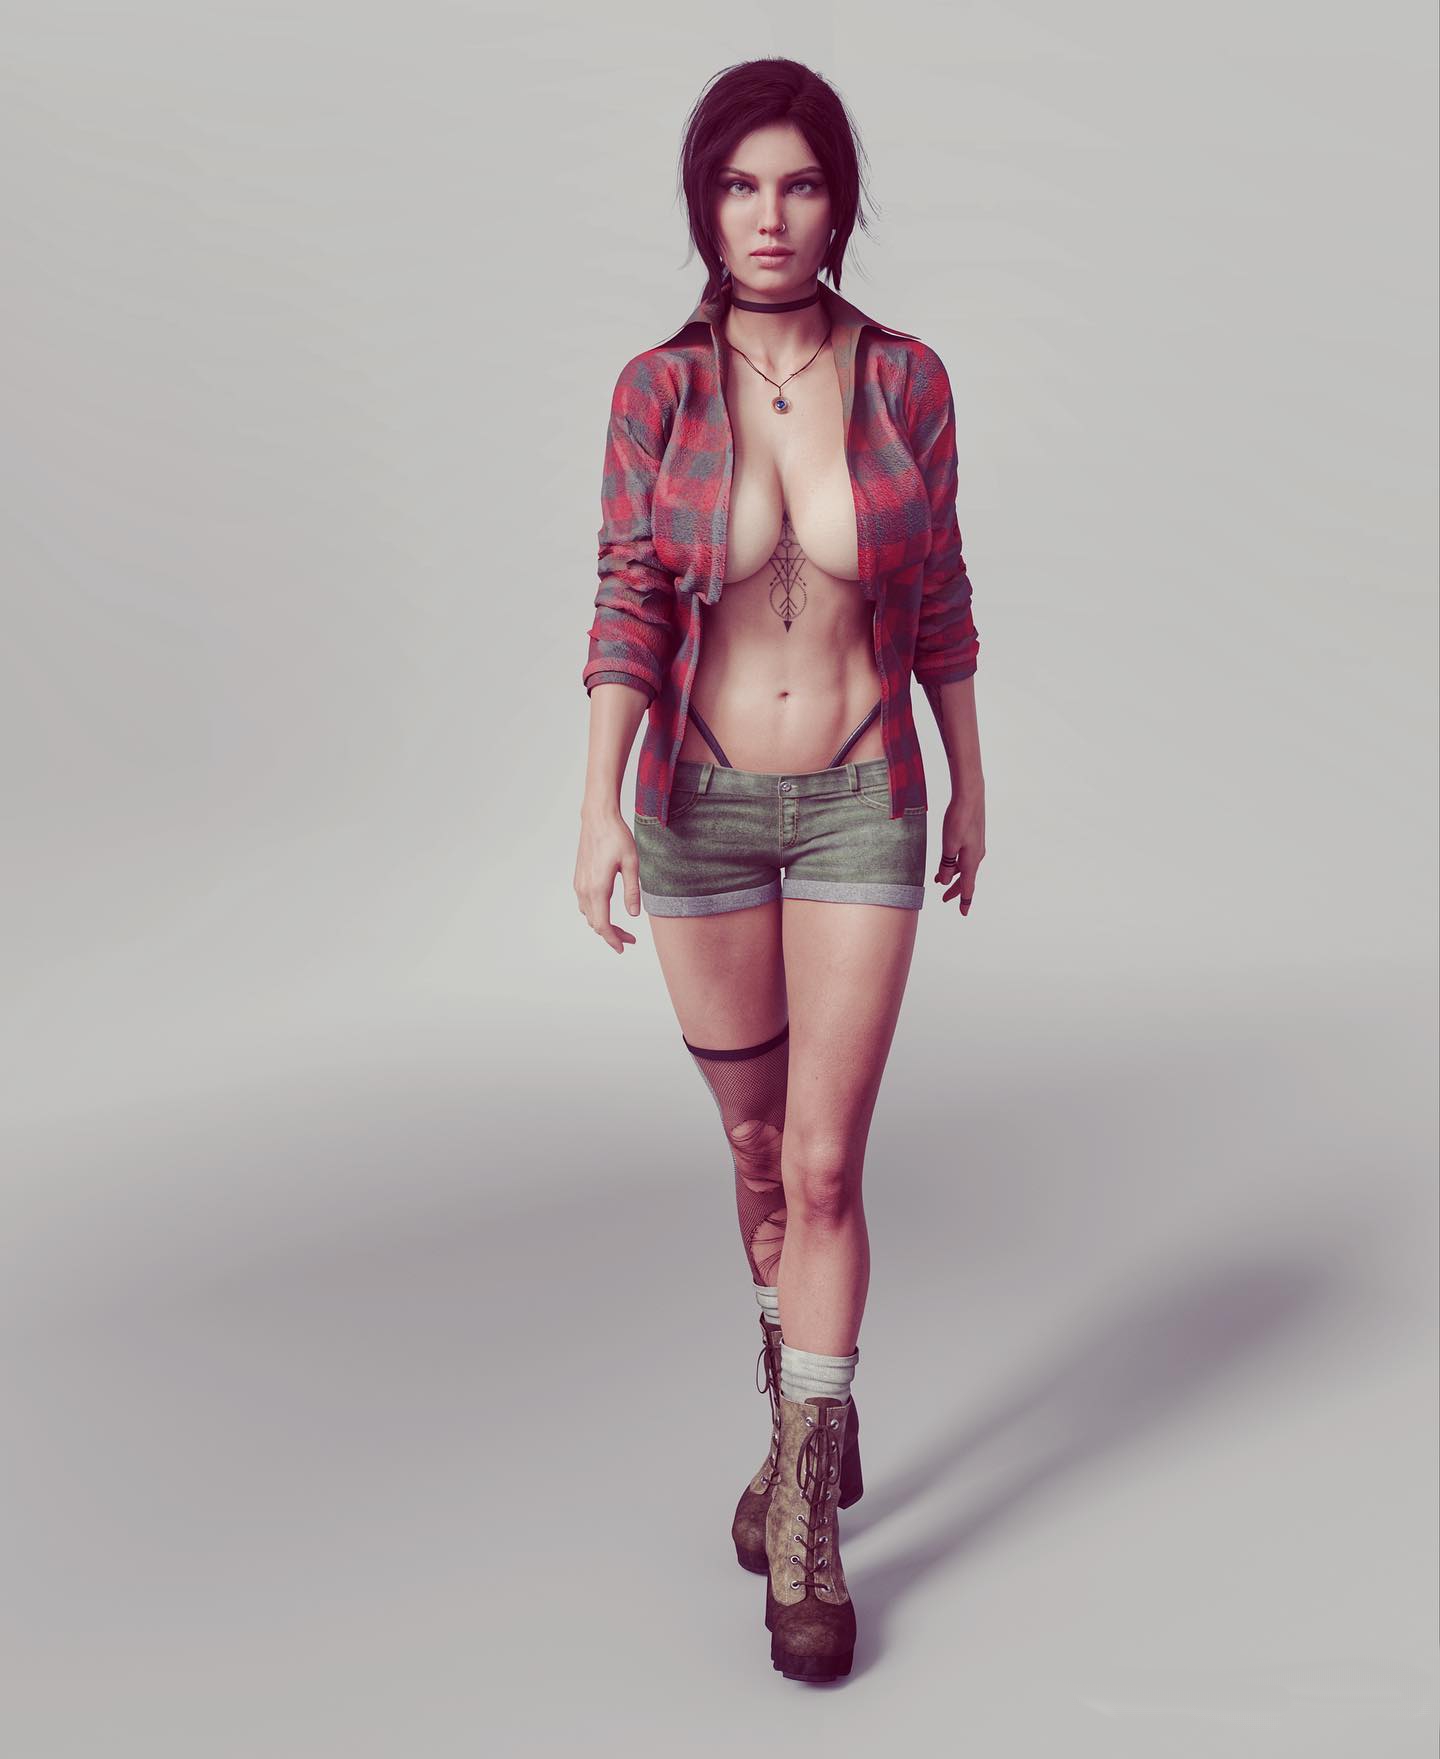 [NOT A GUIDE] The 3Dx artwork of Lara image 67